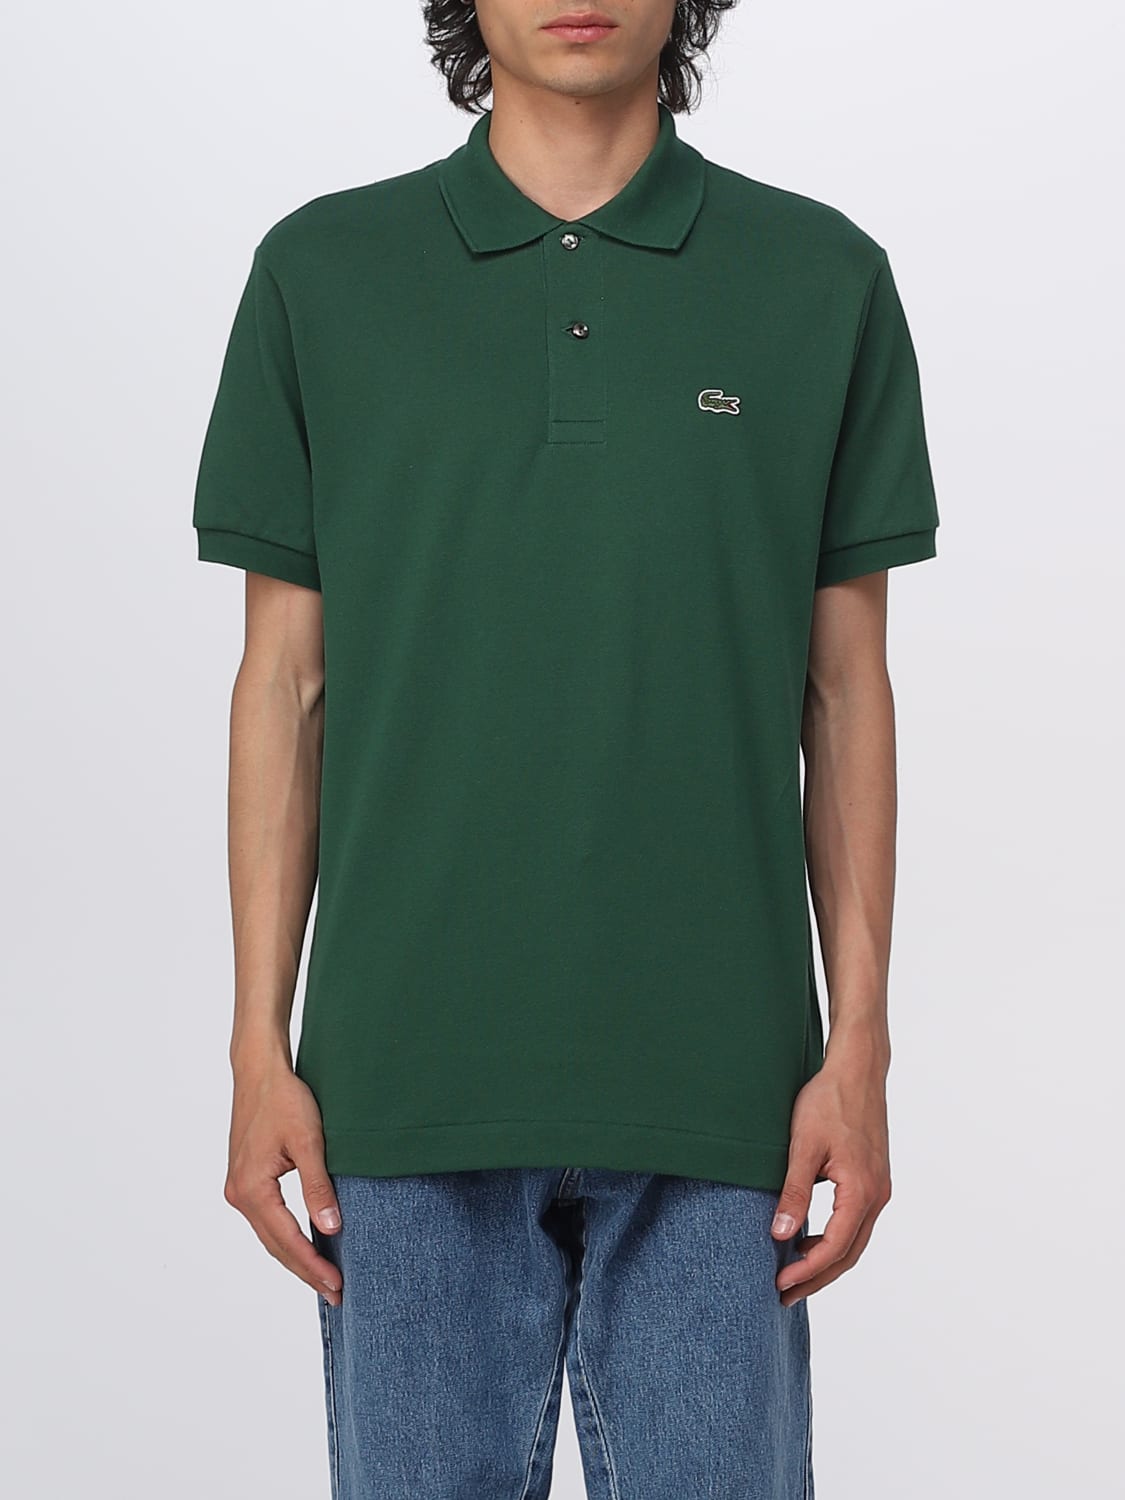 LACOSTE: polo shirt for man - Forest | polo shirt online GIGLIO.COM